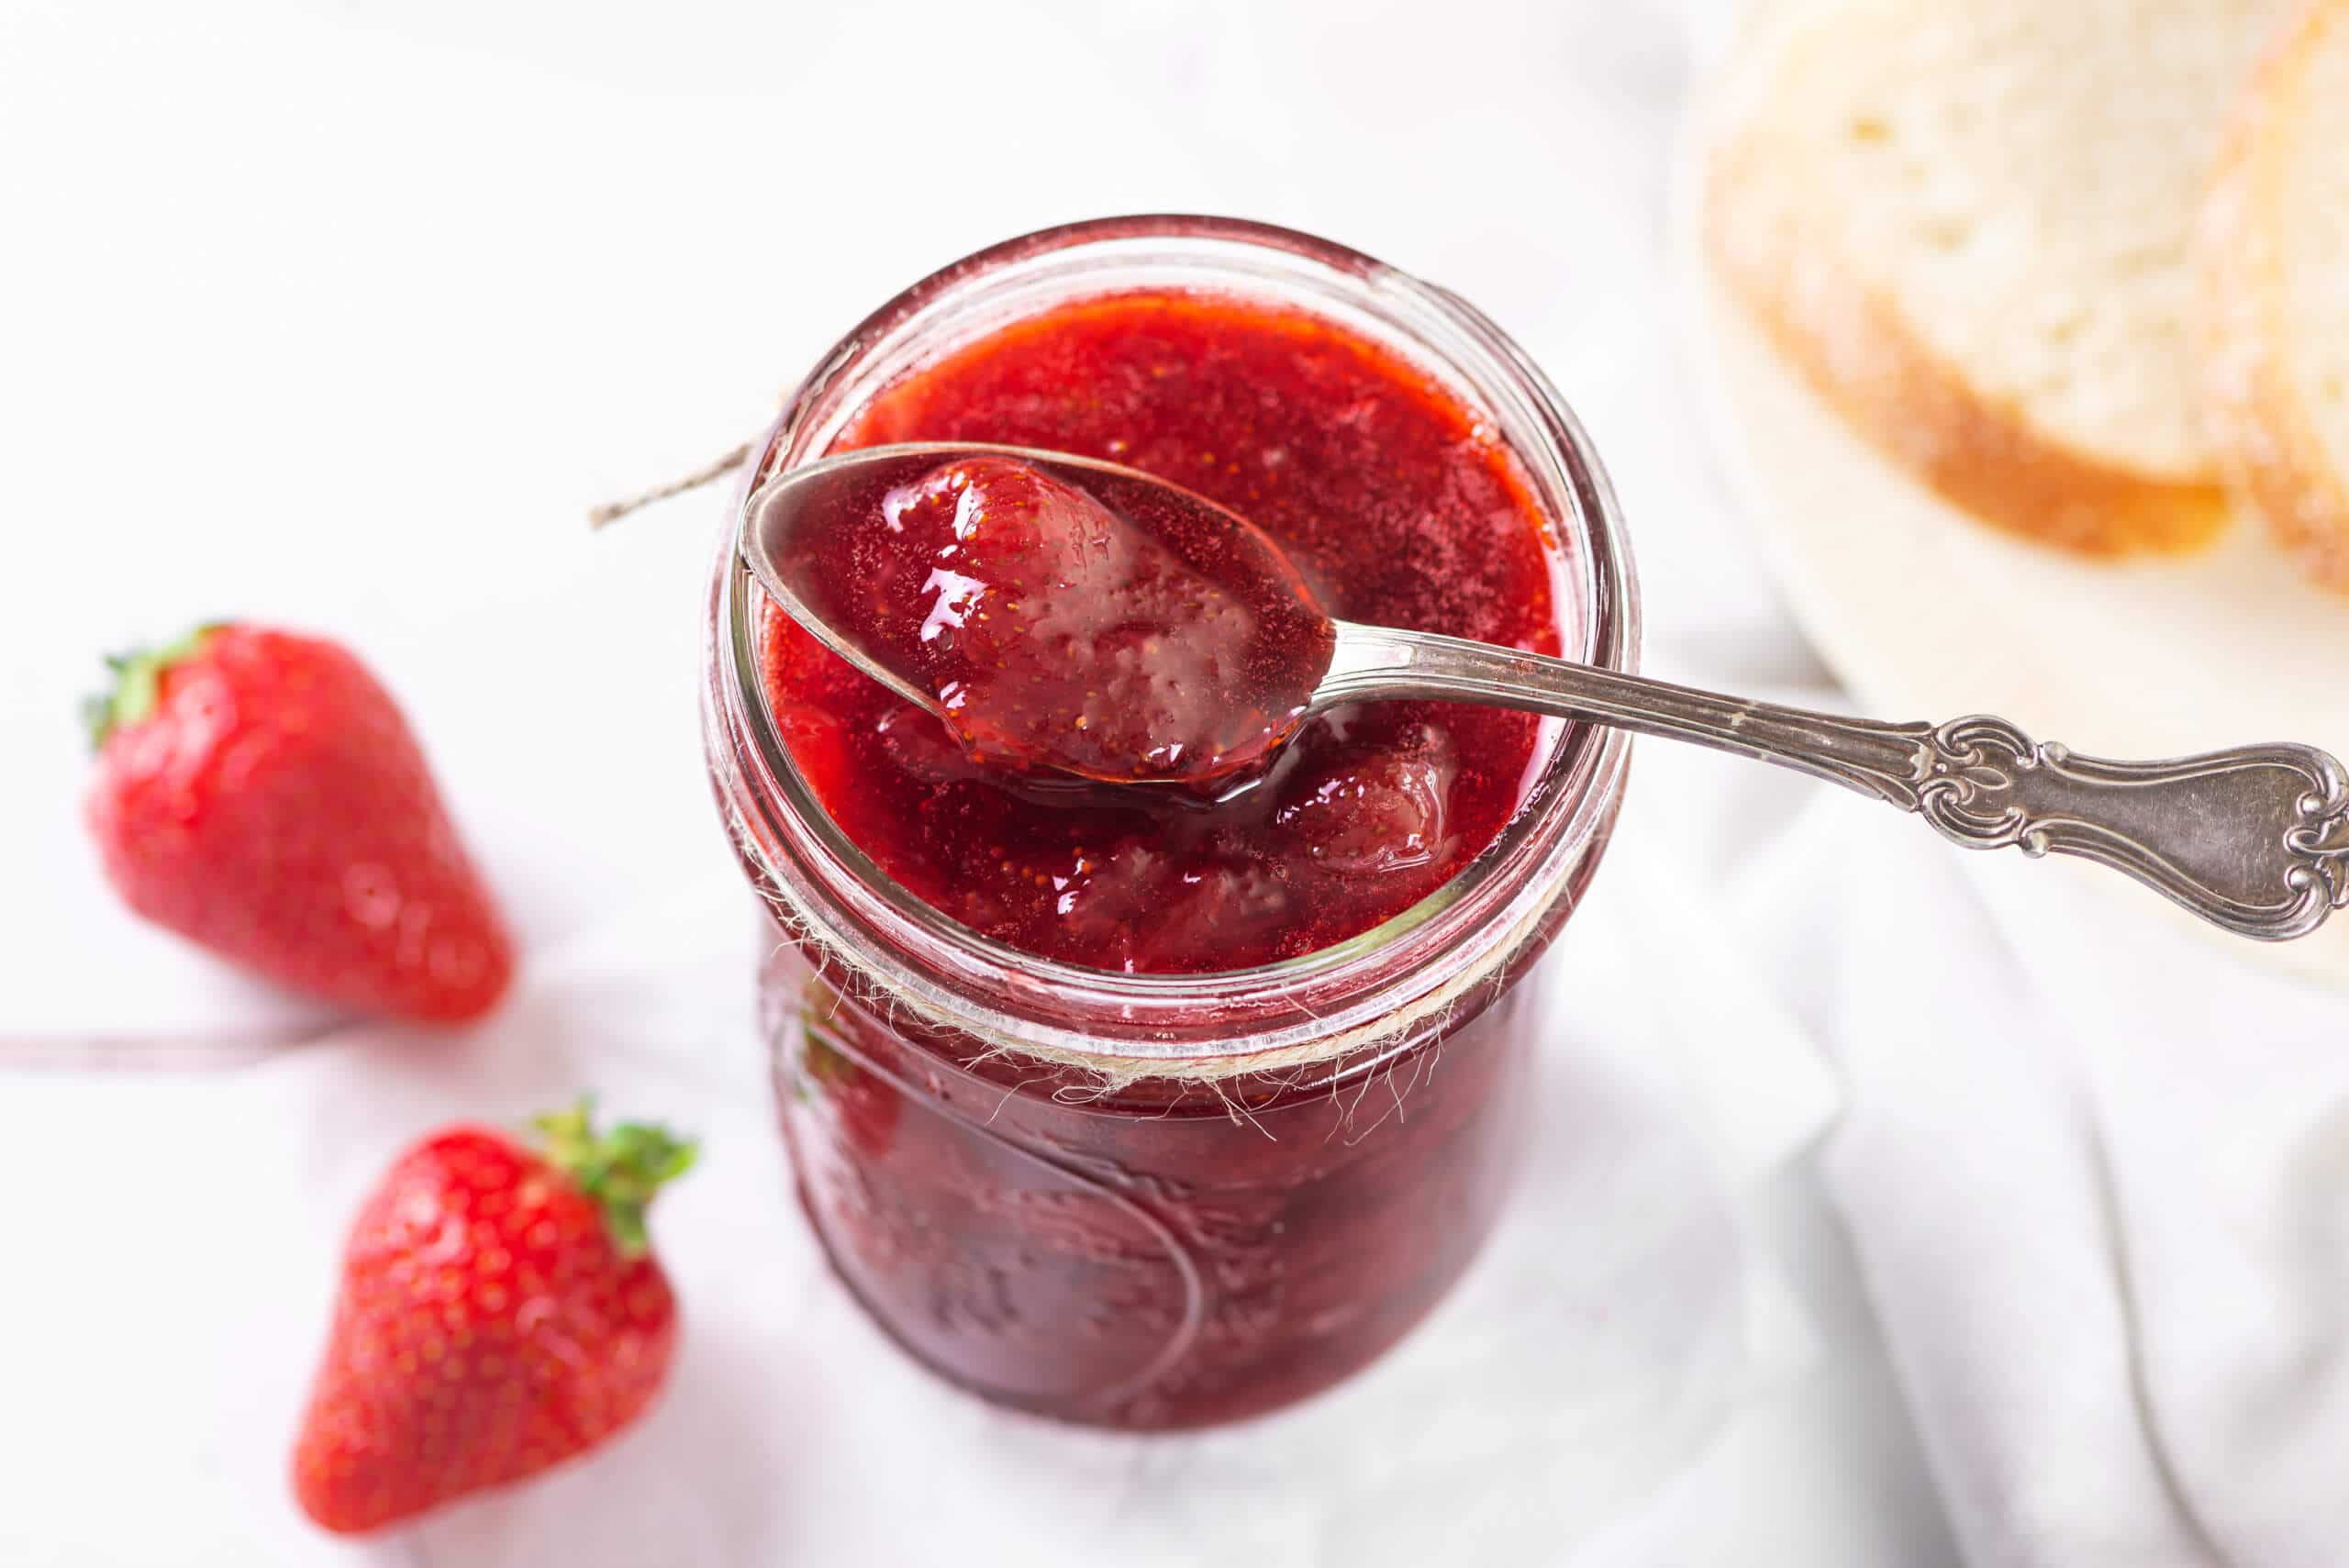 strawberry-jam-in-a-glass-jar-with-a-silver-spoon-with-jam-and-strawberries-in-the-background